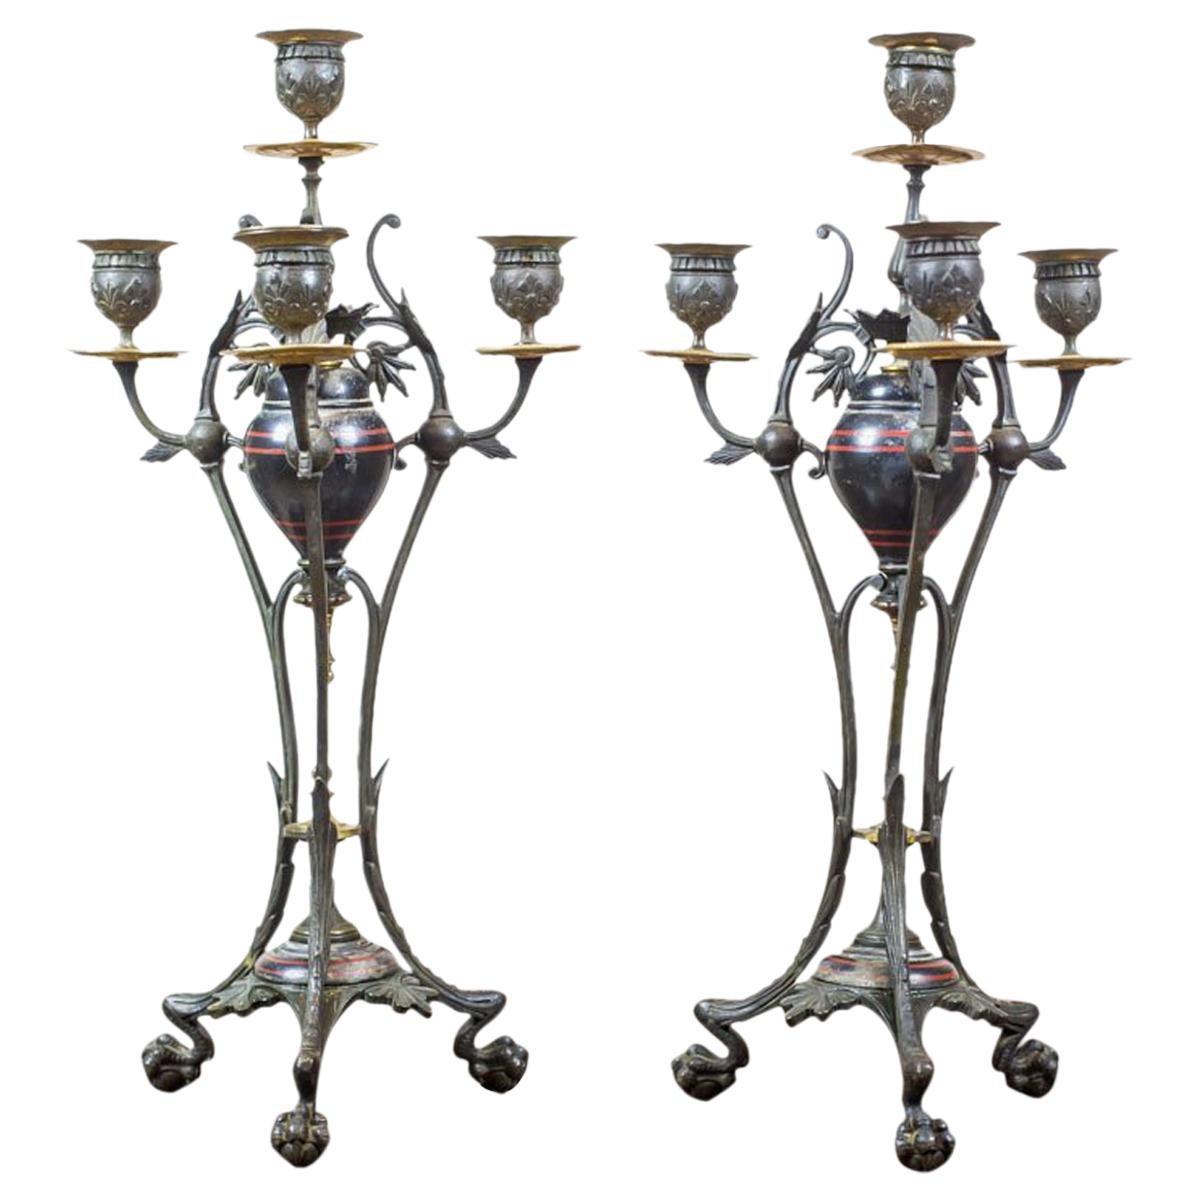 Pair of Candlesticks from the Turn of the 19th and 20th Centuries